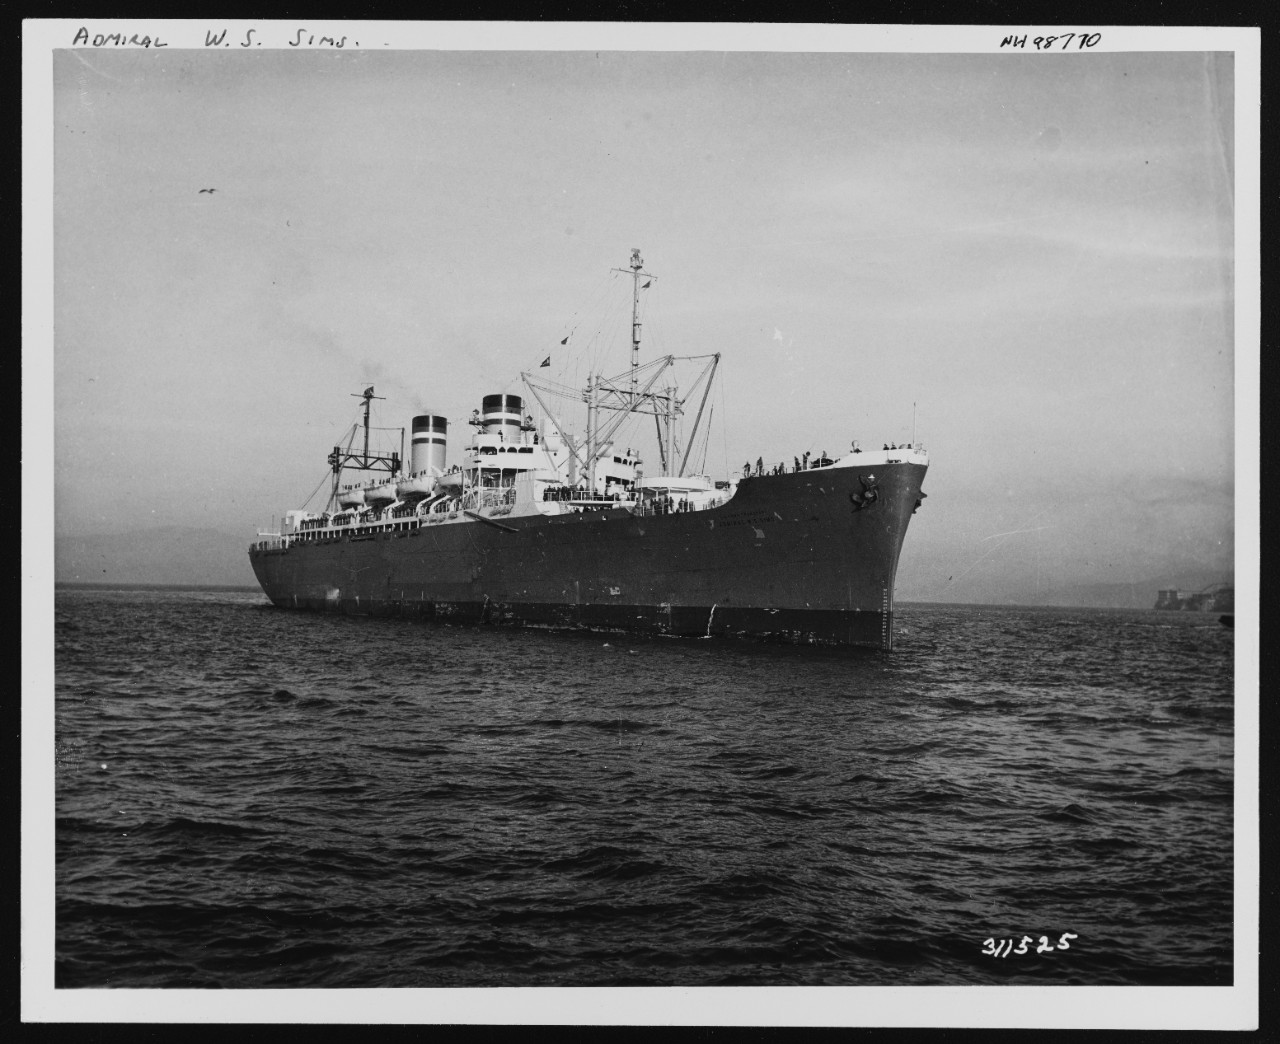 Photo #: NH 98770  USAT Admiral W. S. Sims